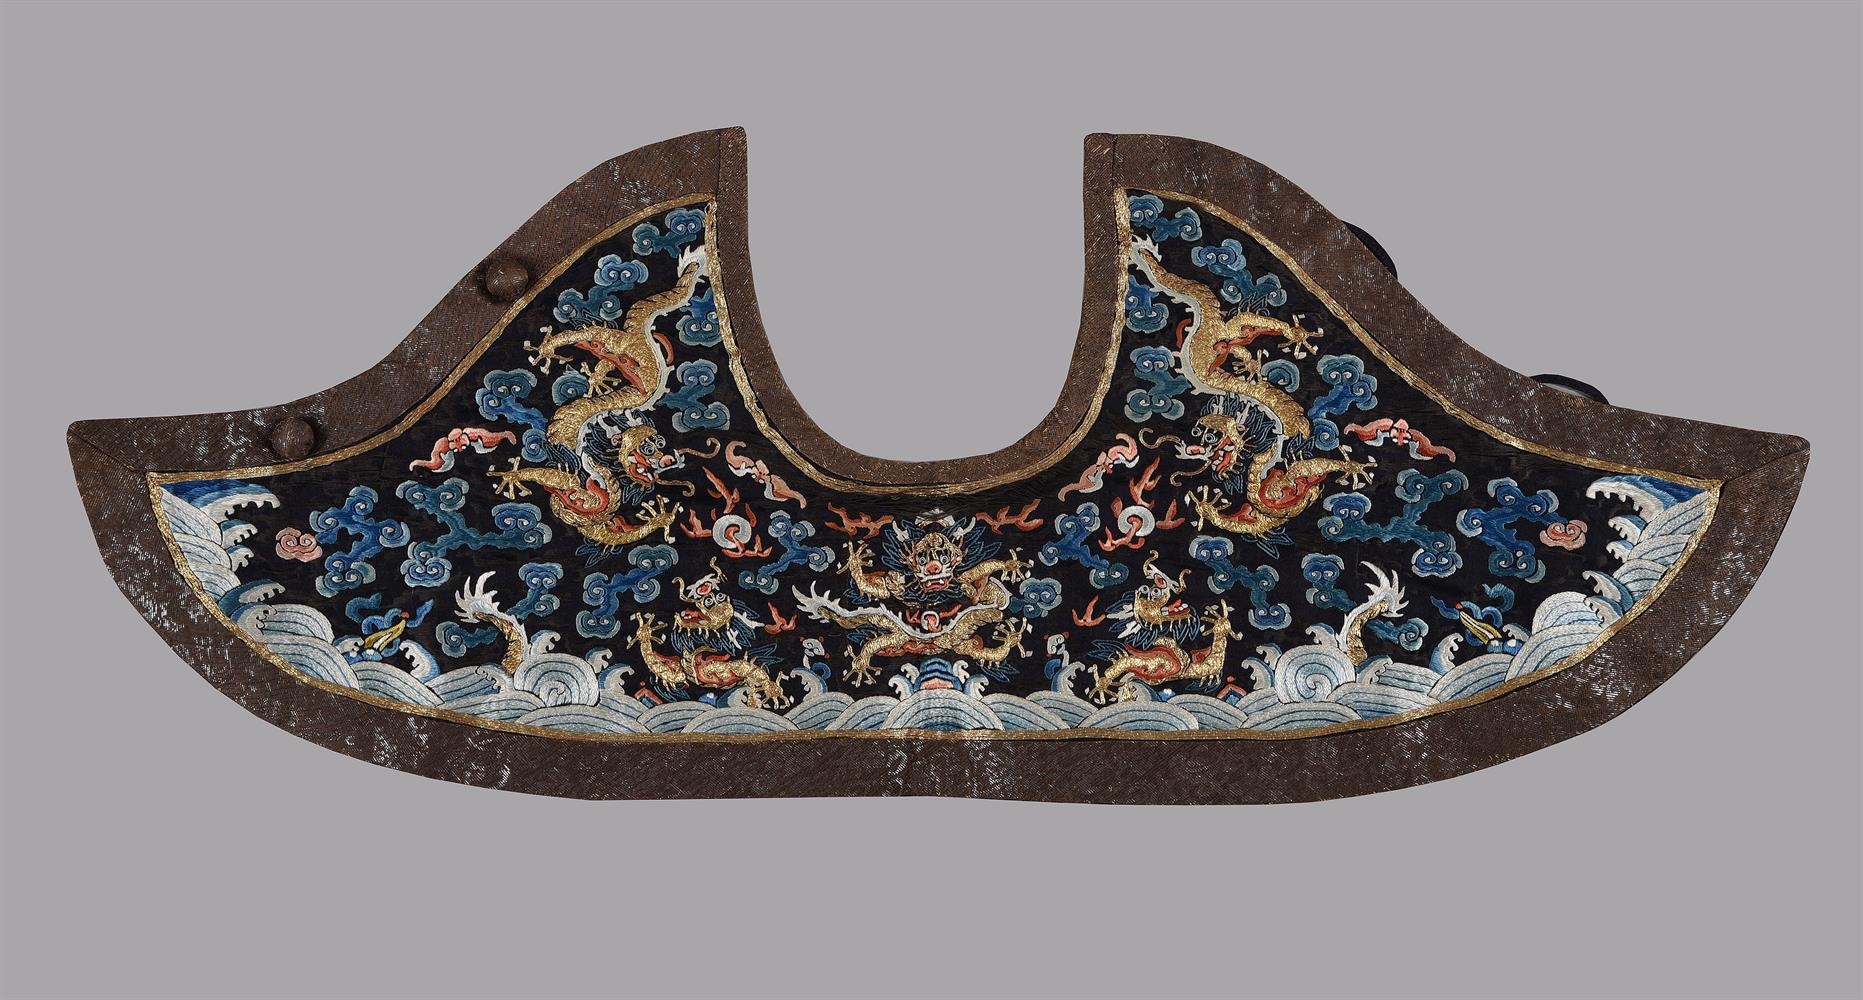 A rare Chinese Piling collar worn as part of the formal robes of a Mandarin